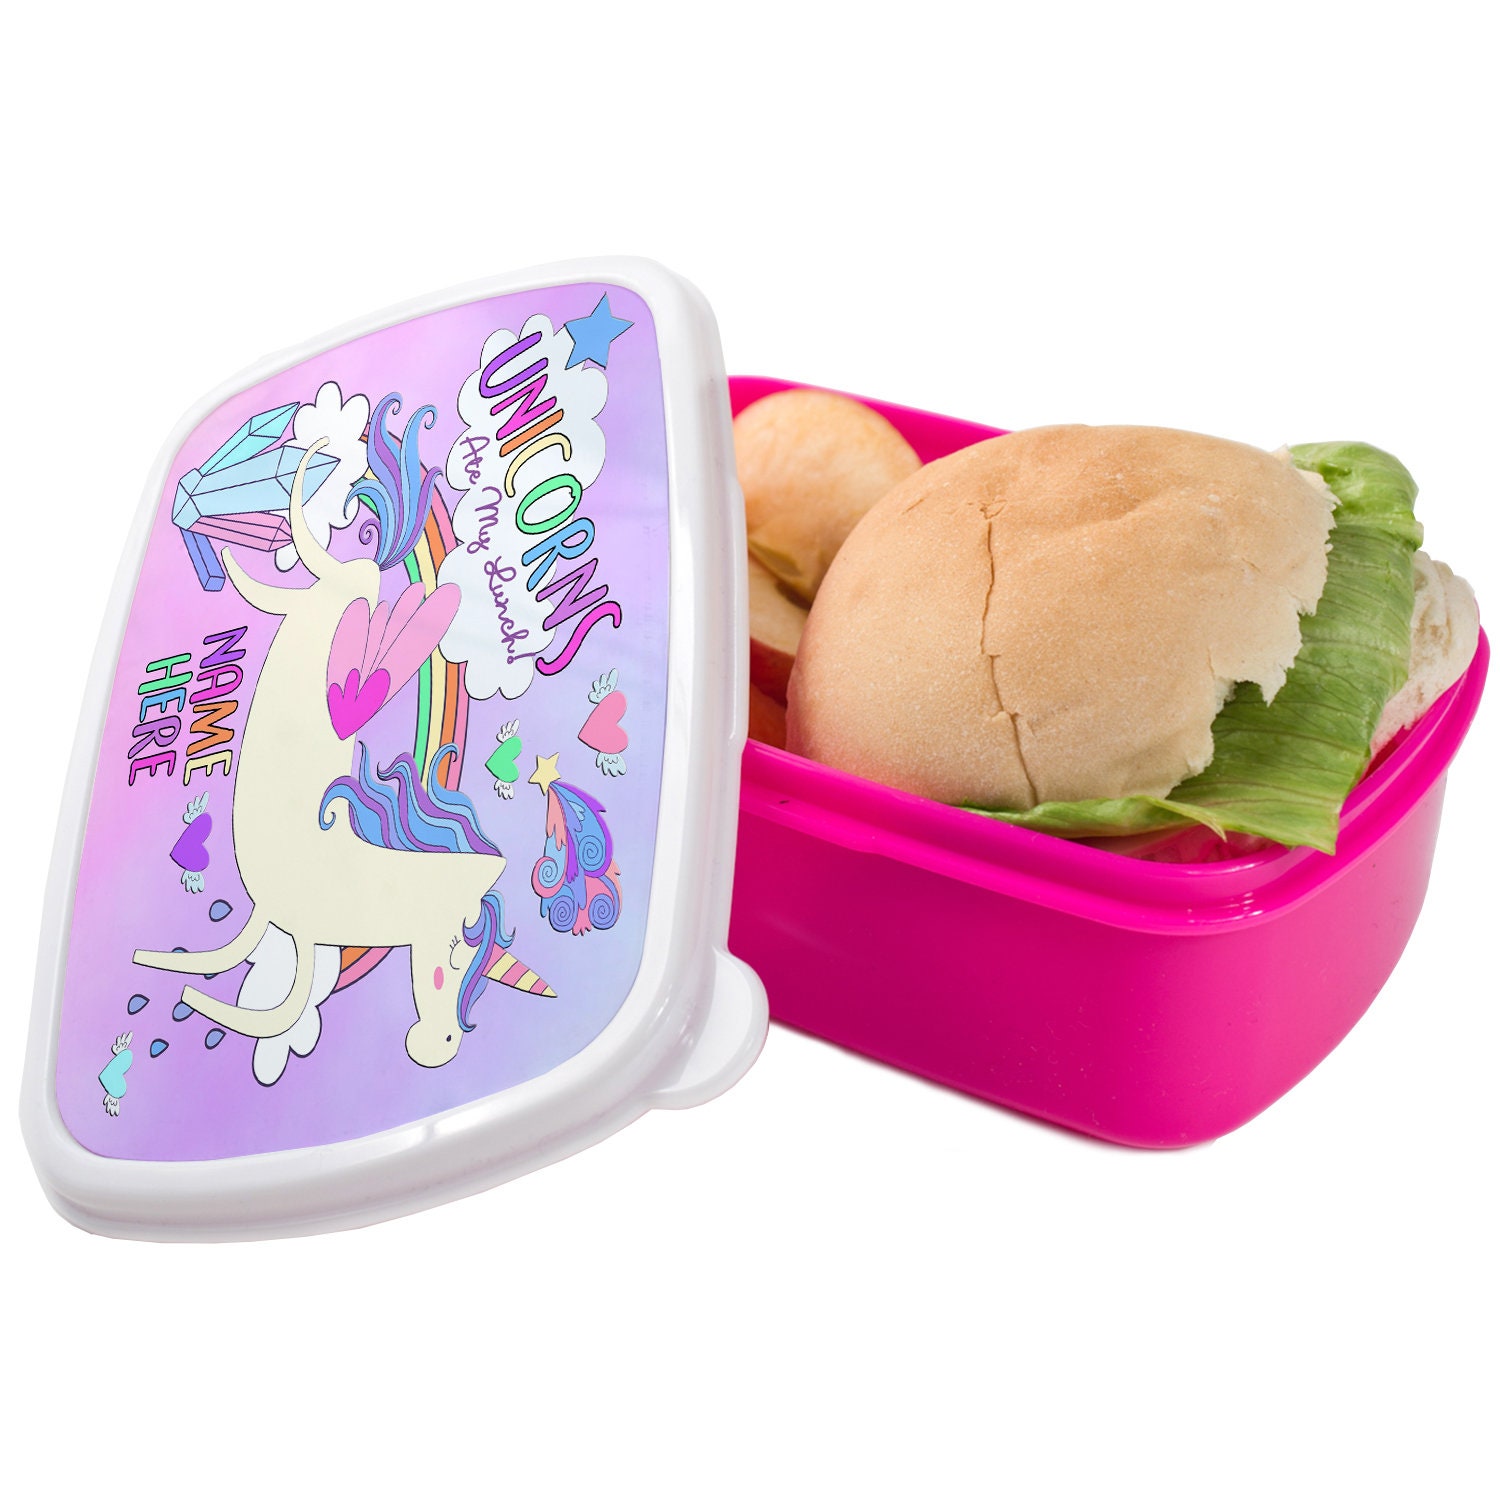 Lunch Boxes & Accessories — The Lovin Sisters